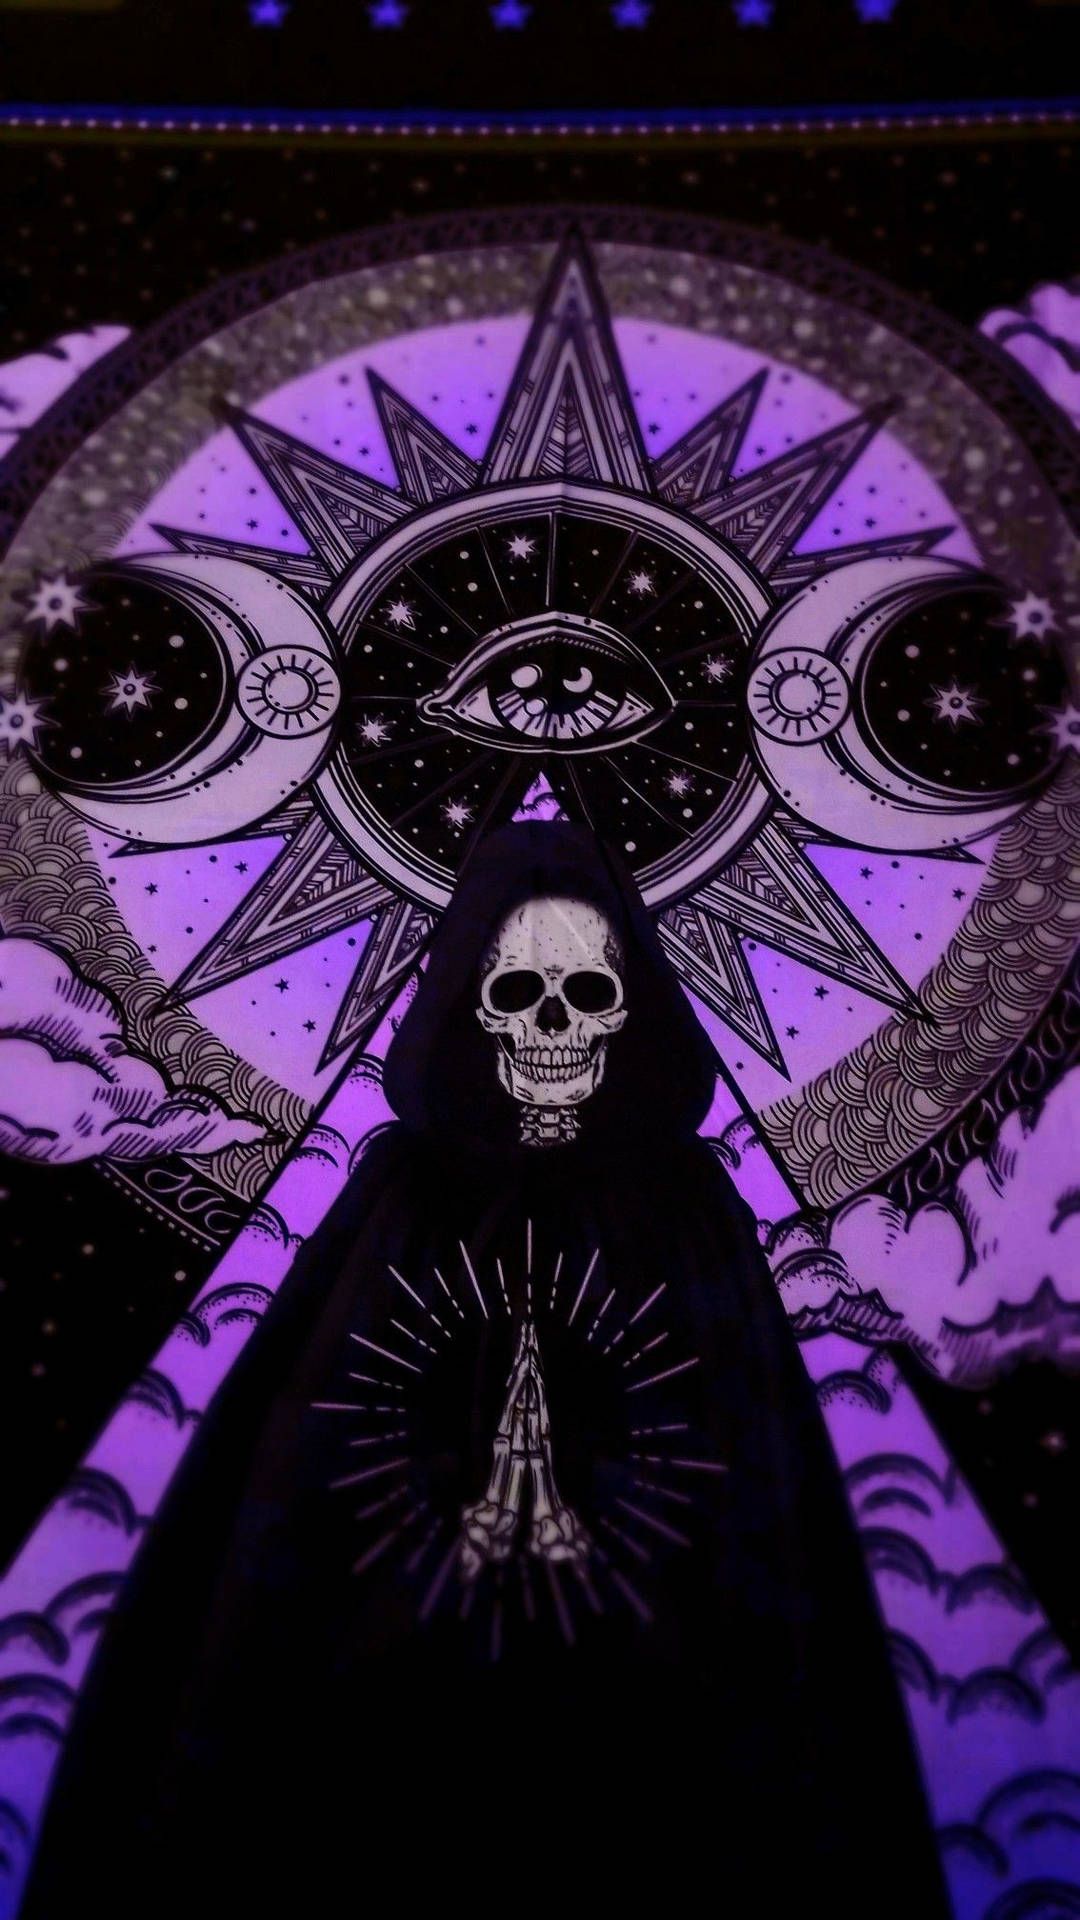 For the image a purple tapestry with an eye in it - Gothic